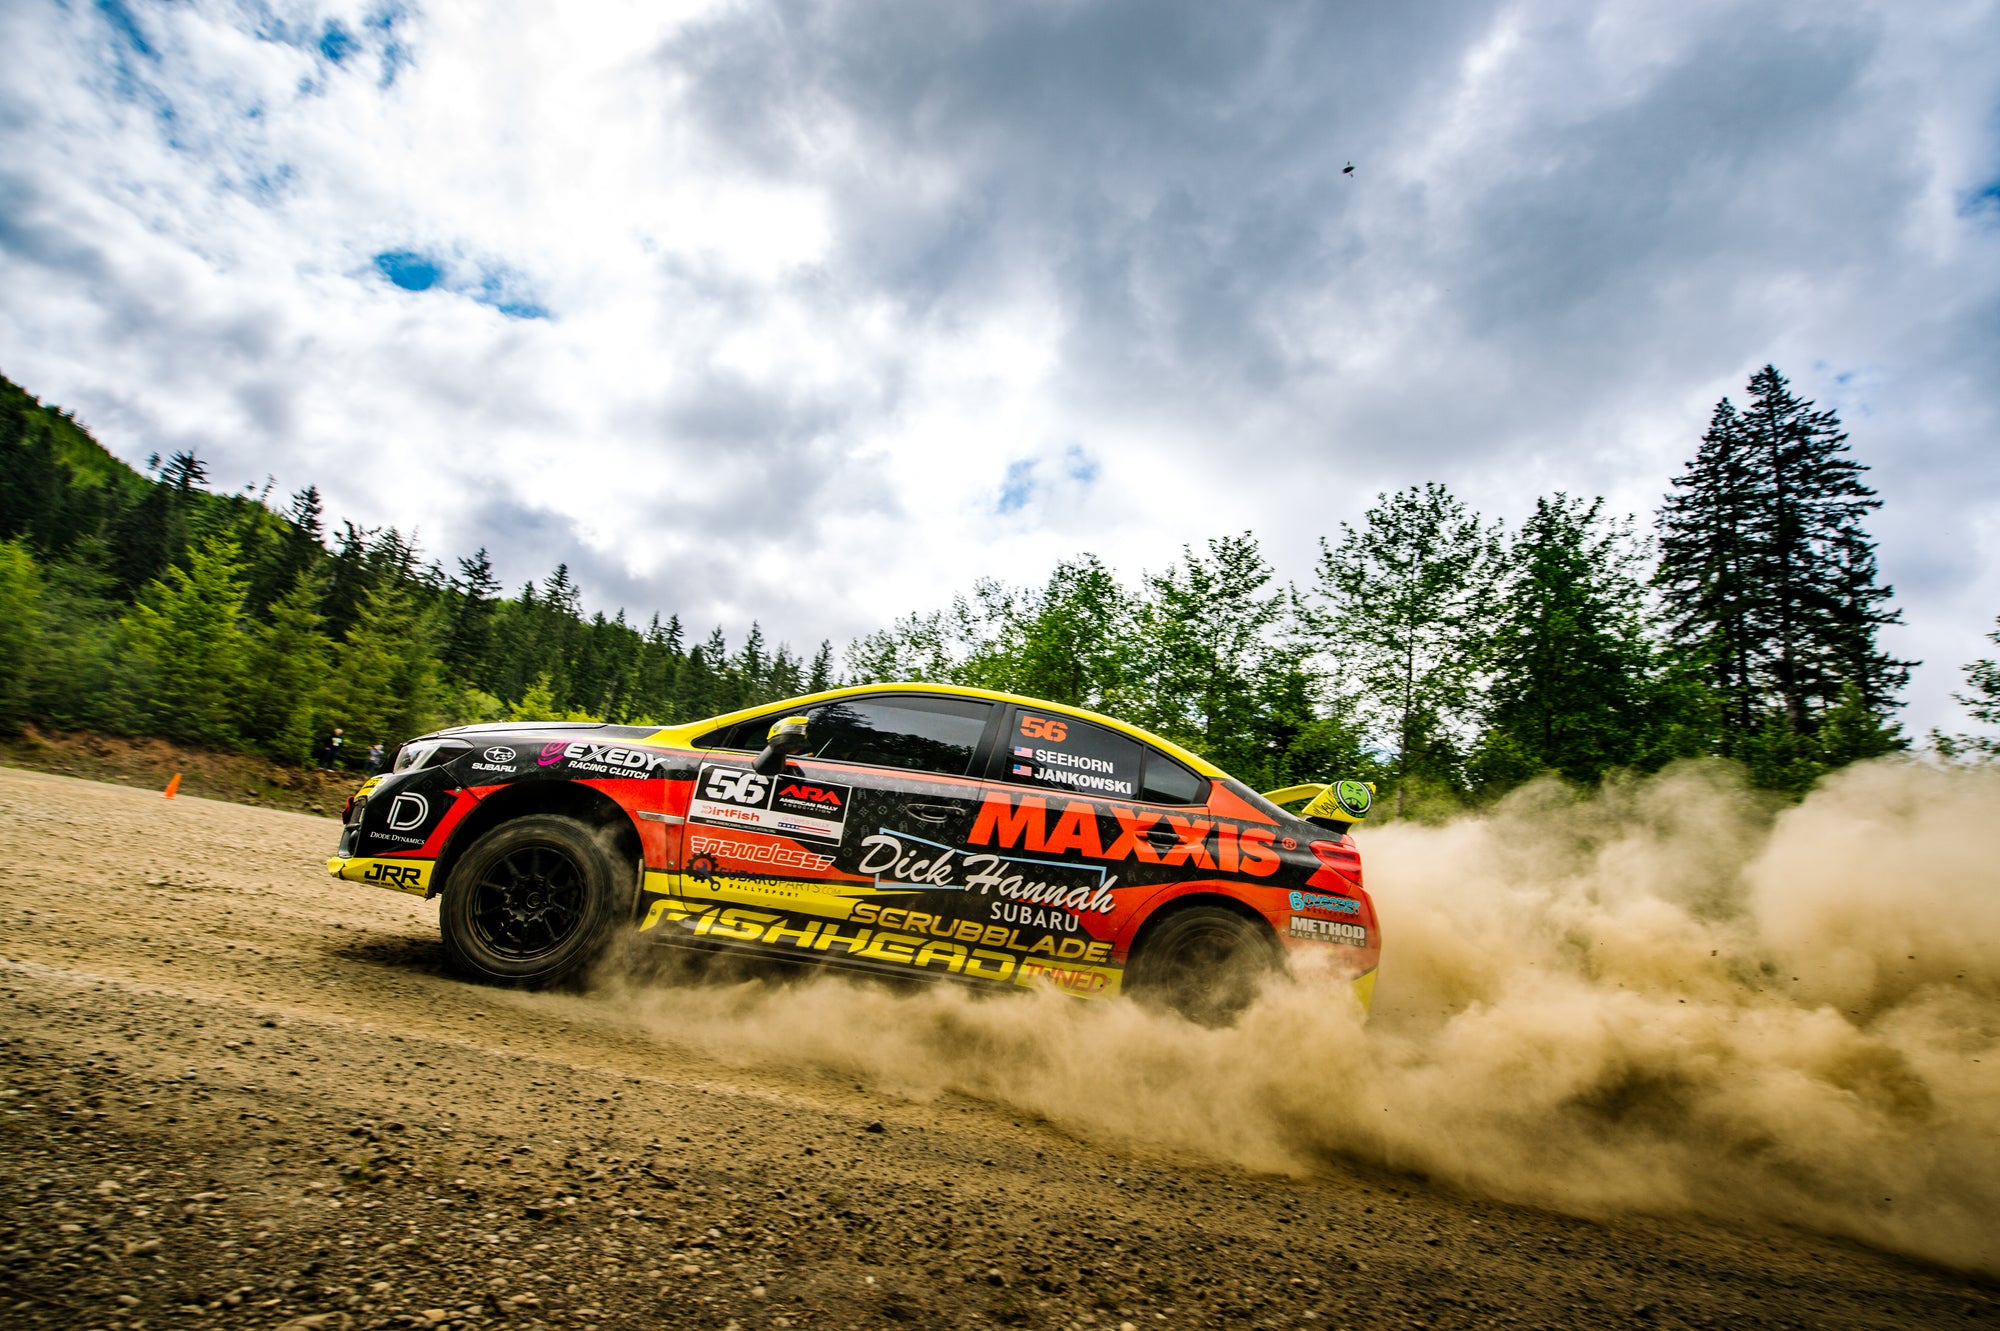 Consistency Pays Off At Olympus for Seehorn Rally Team